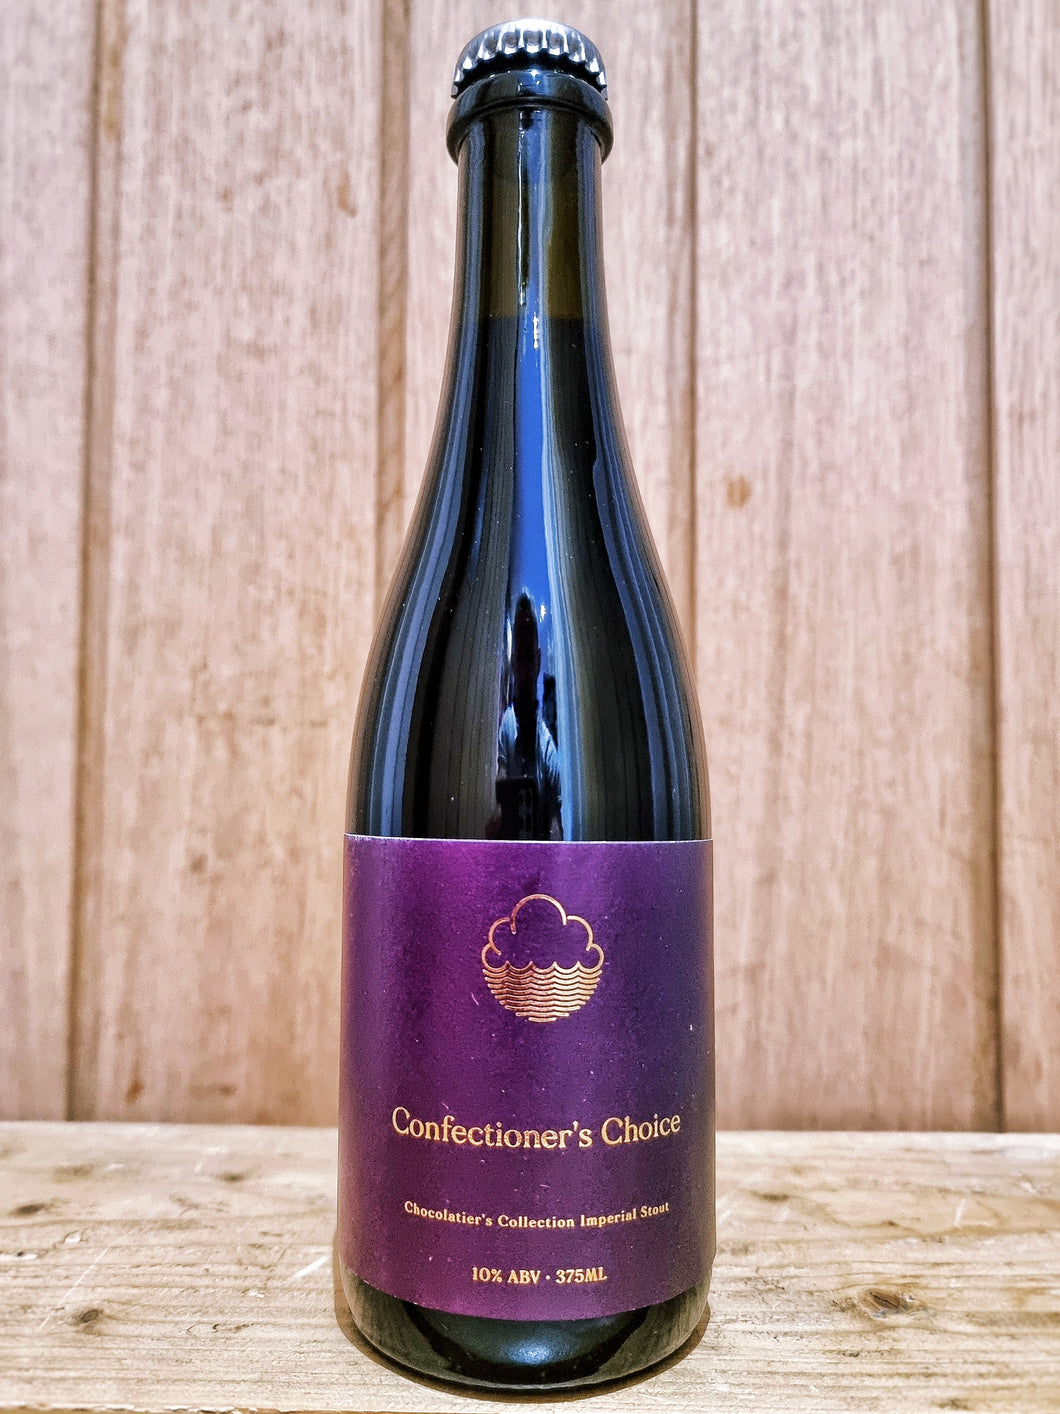 Cloudwater - Confectioner's Choice